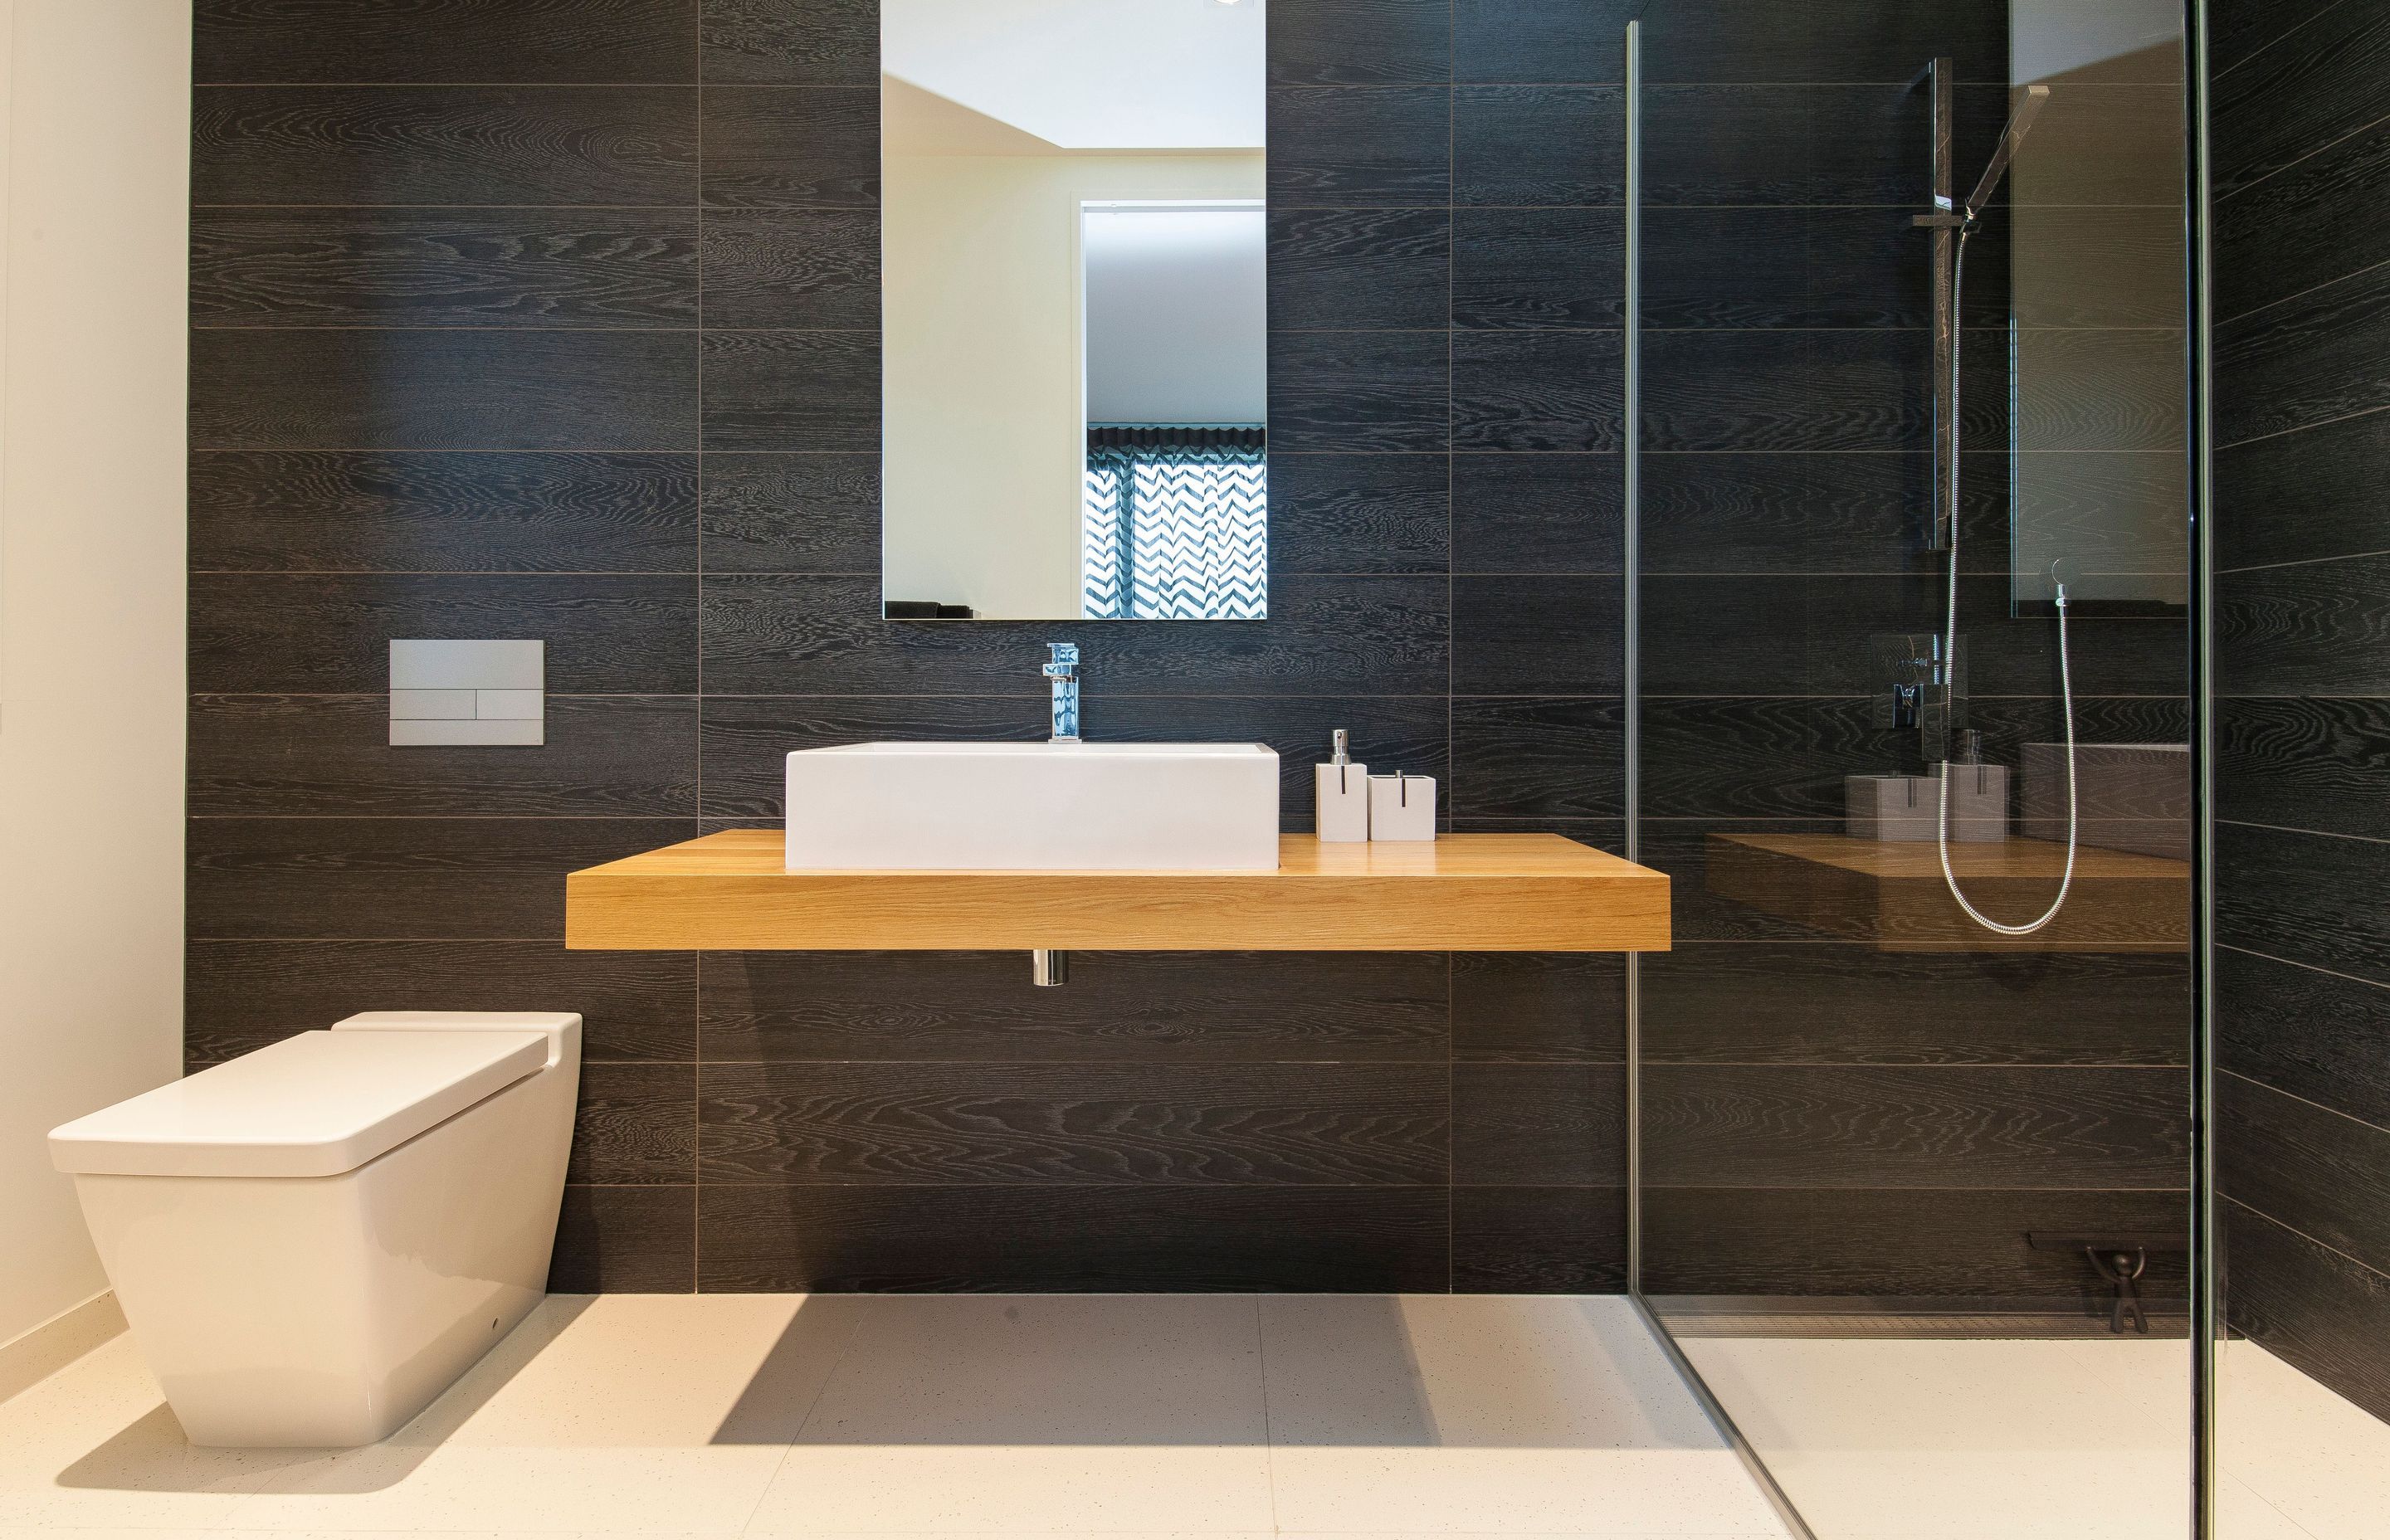 Timber-look tiles have been used on the walls of the bathrooms to echo the darkly stained exterior concrete finish.